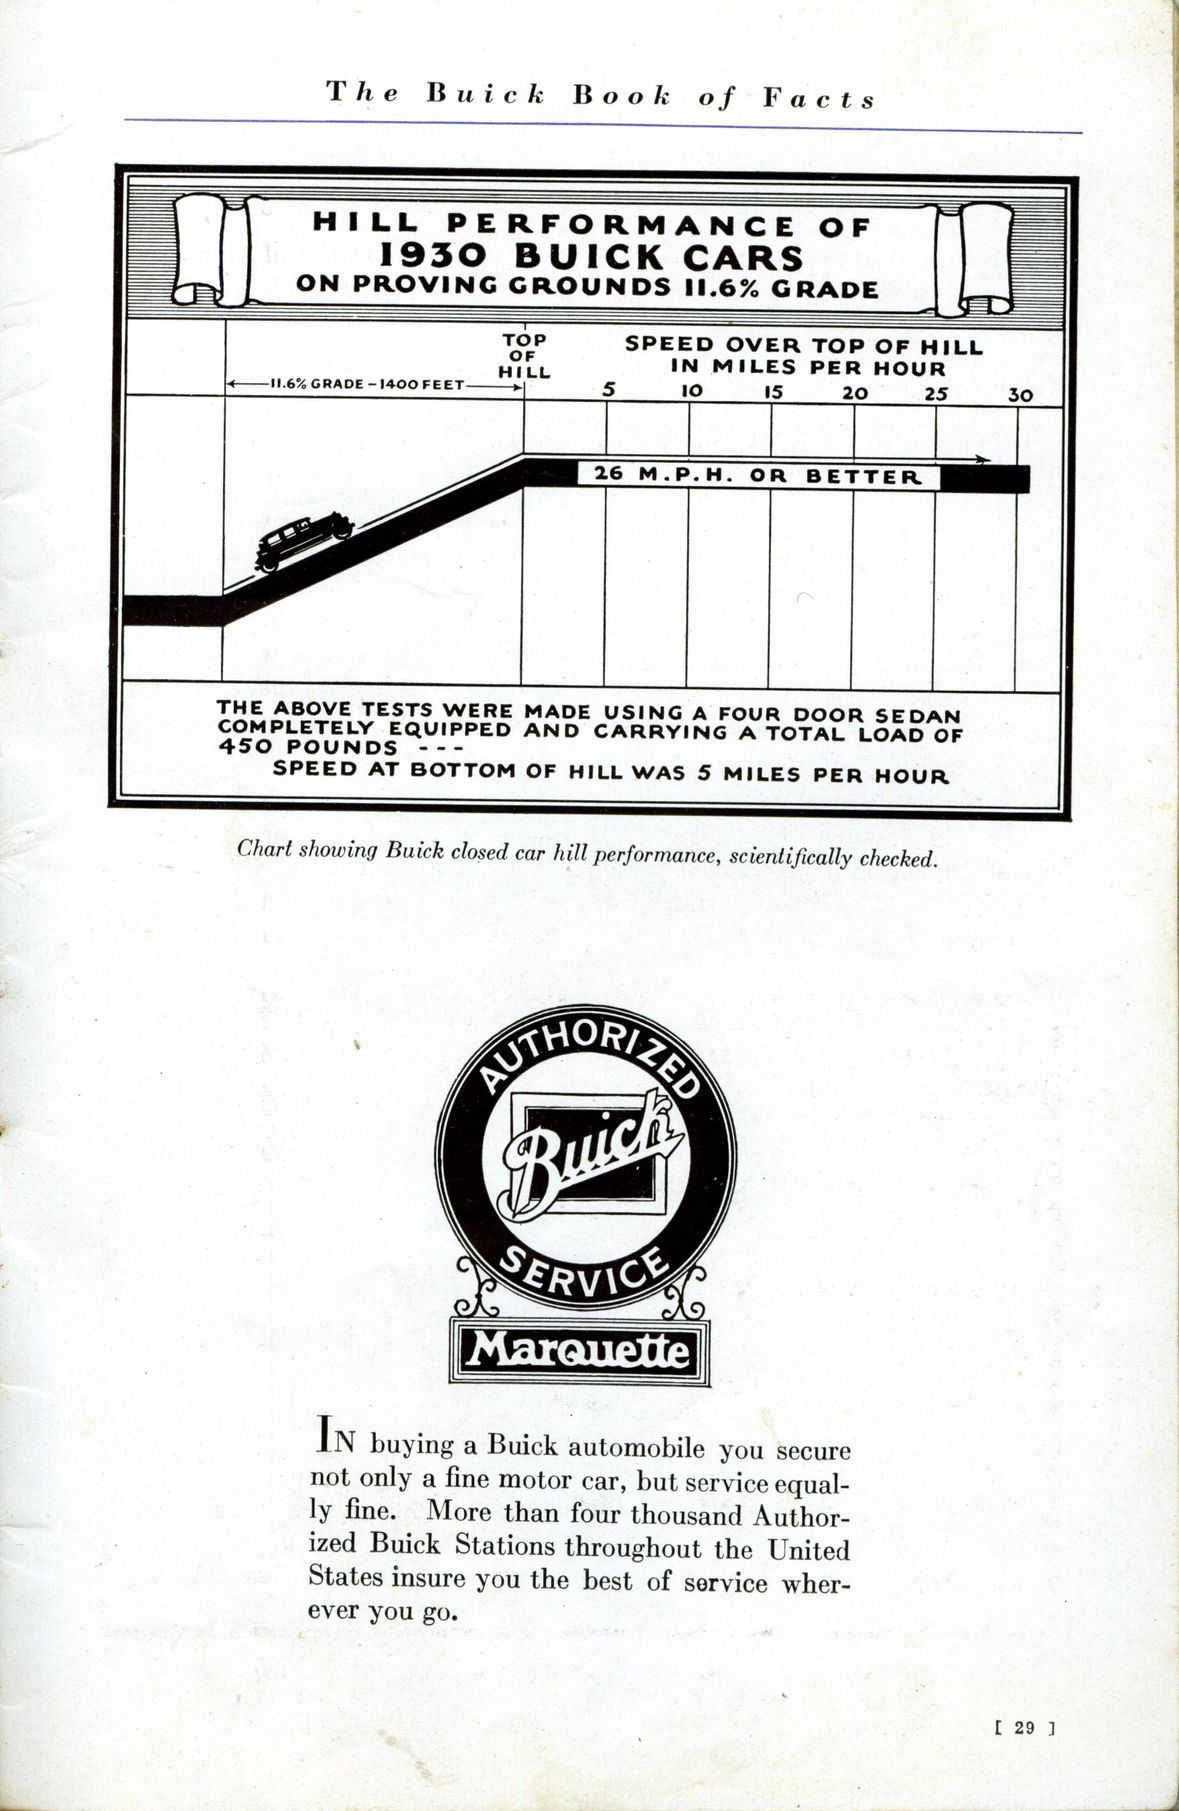 1930 Buick Book of Facts-29